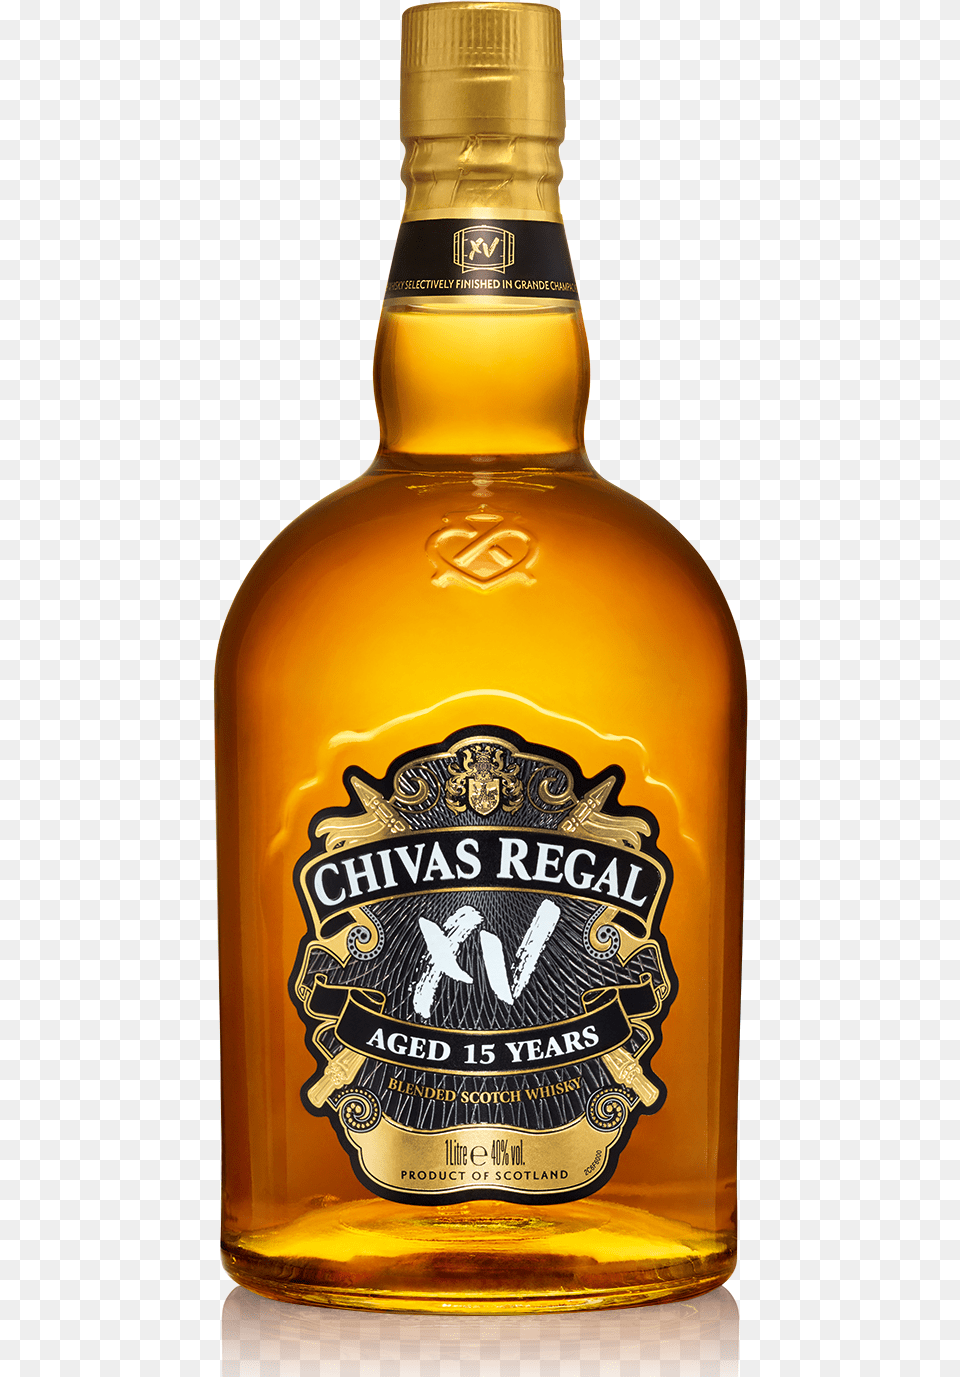 Chivas Regal 15 Years, Alcohol, Beverage, Liquor, Whisky Png